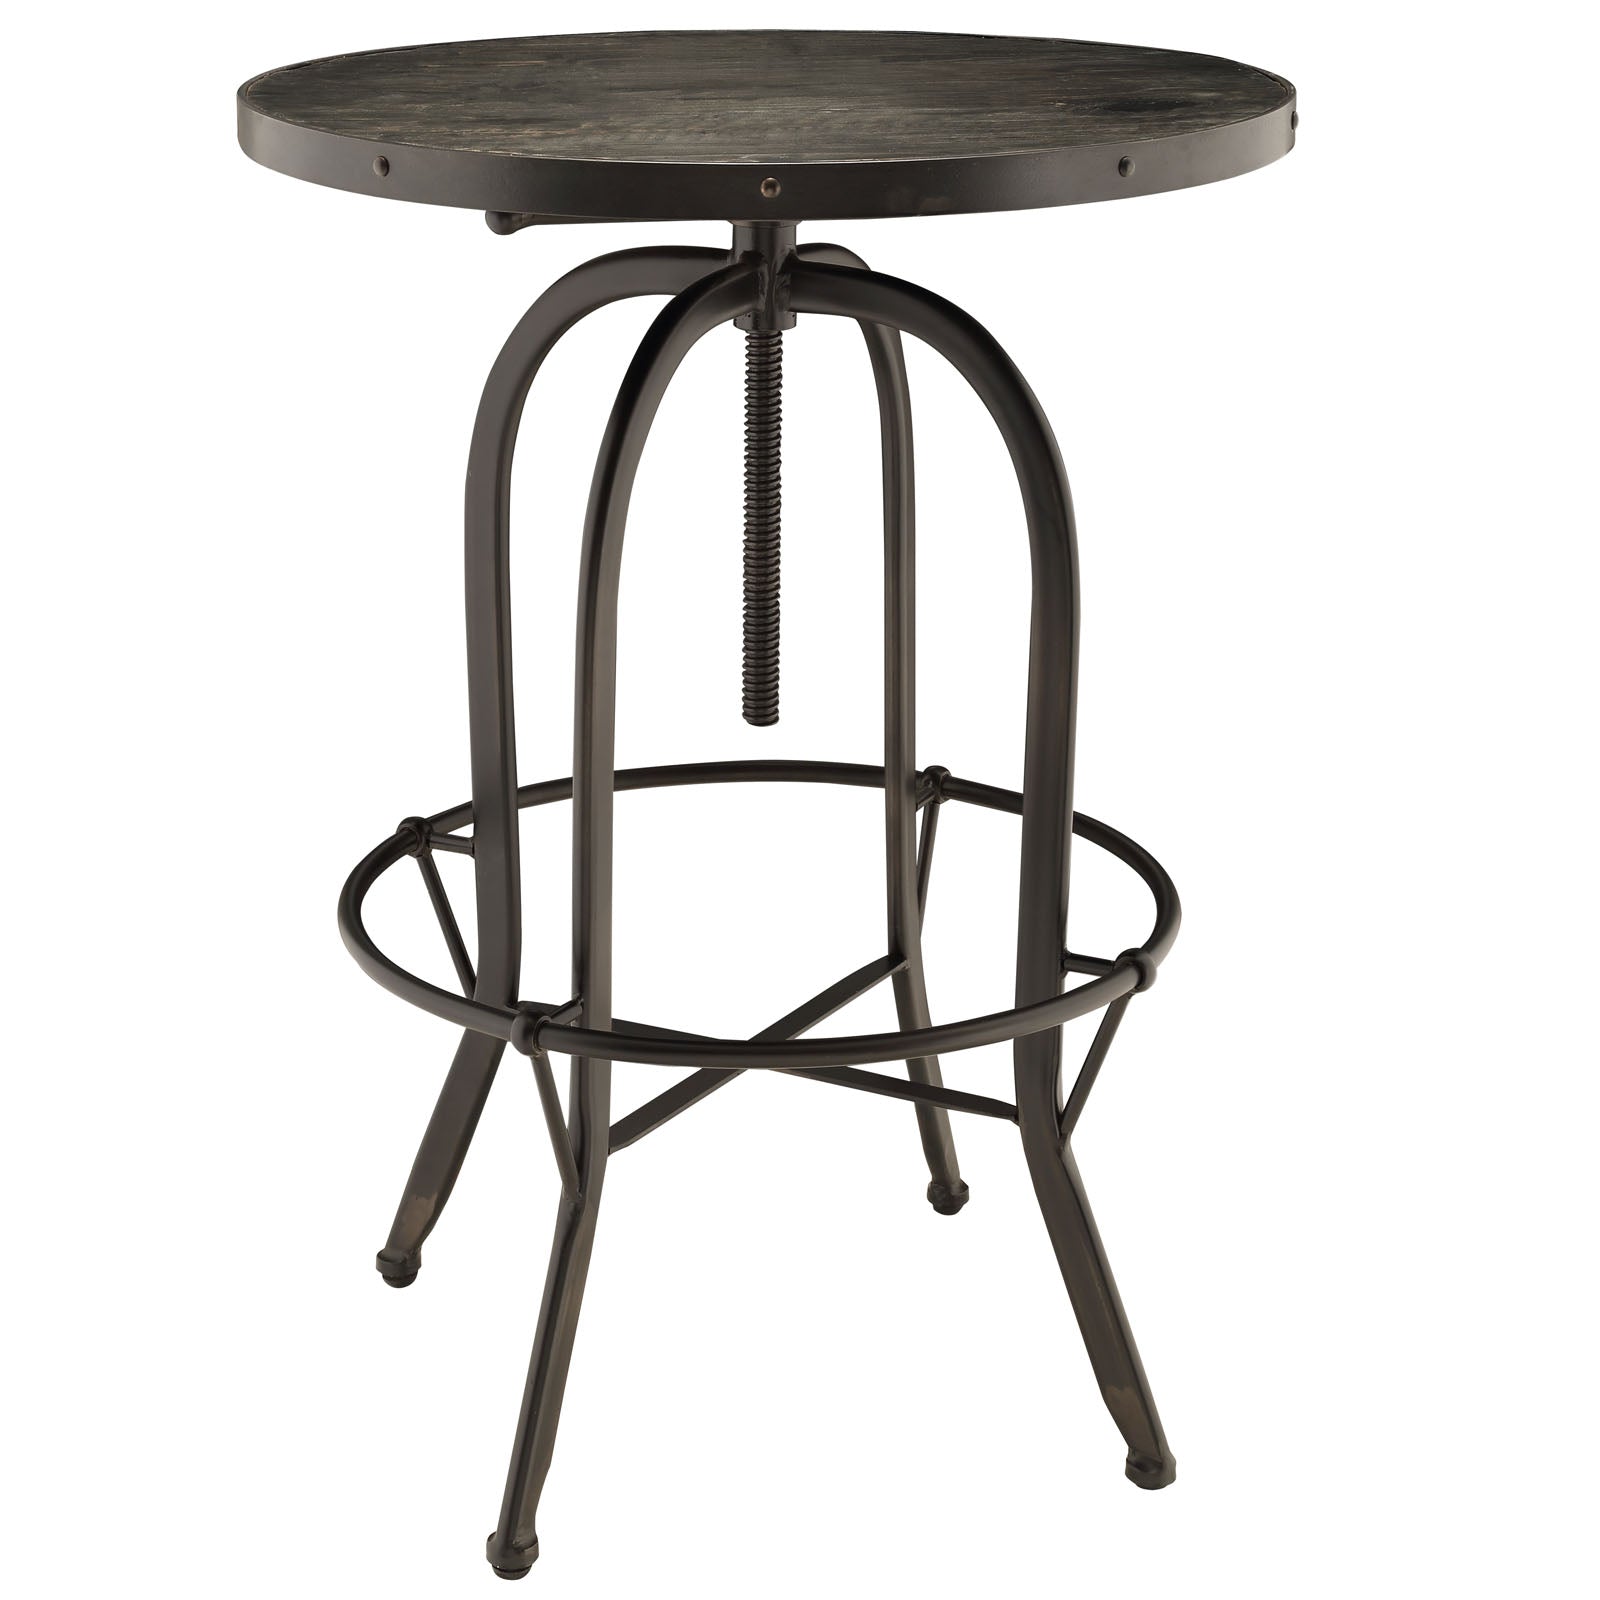 Gather 5 Piece Dining Set - East Shore Modern Home Furnishings